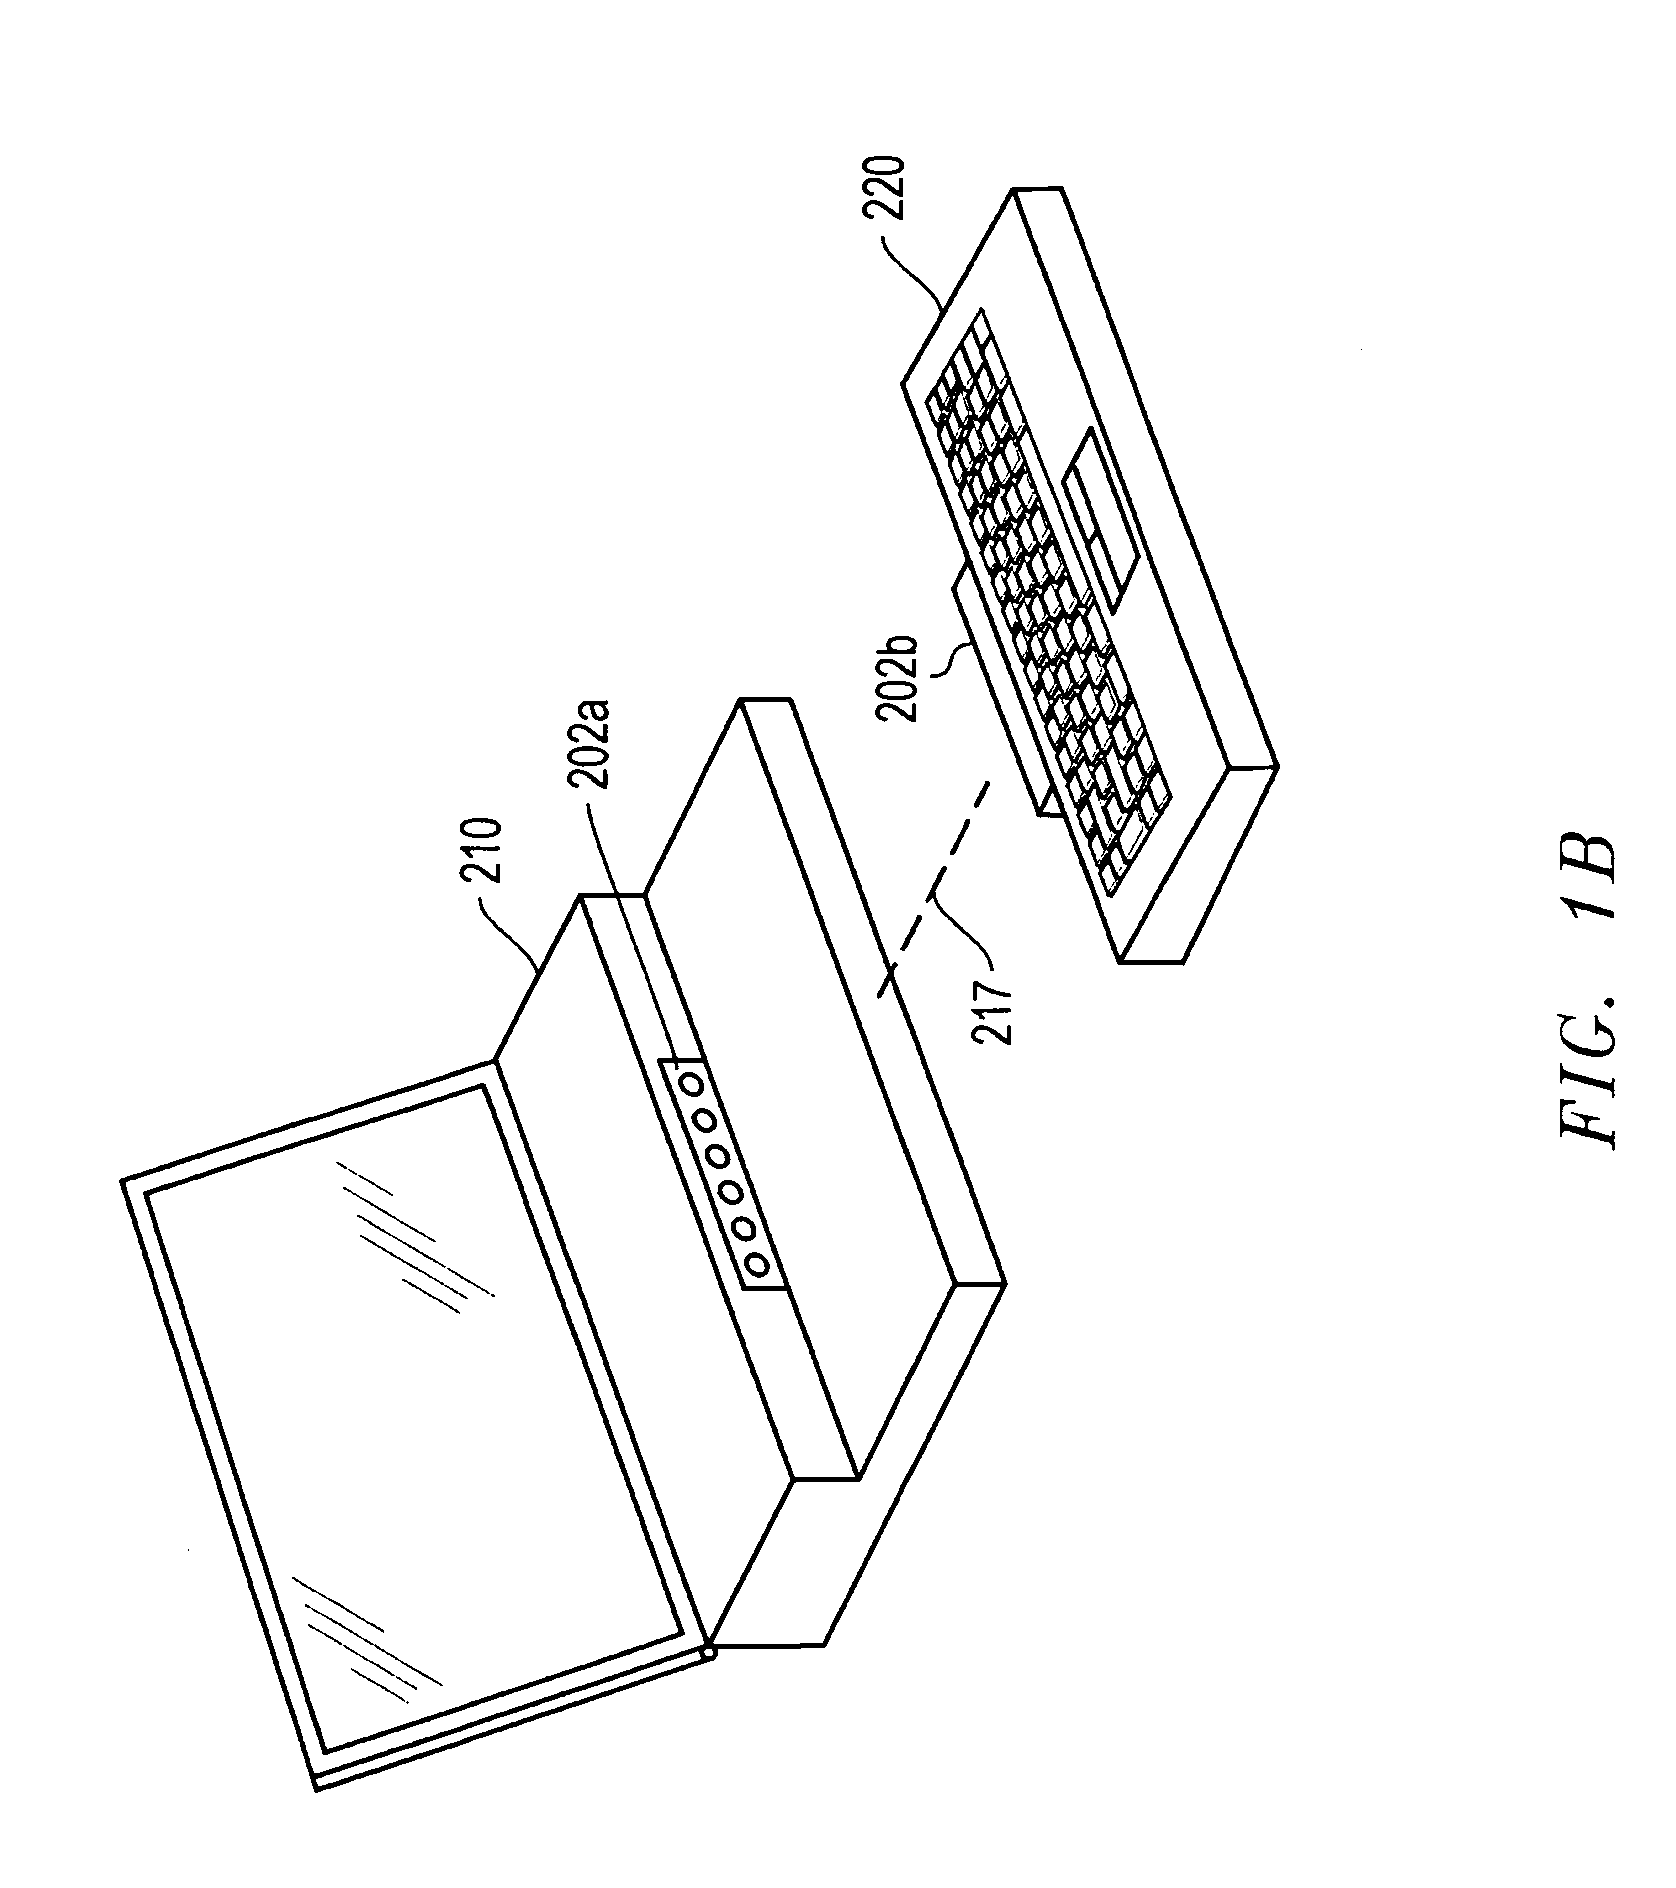 Battery systems for information handling systems